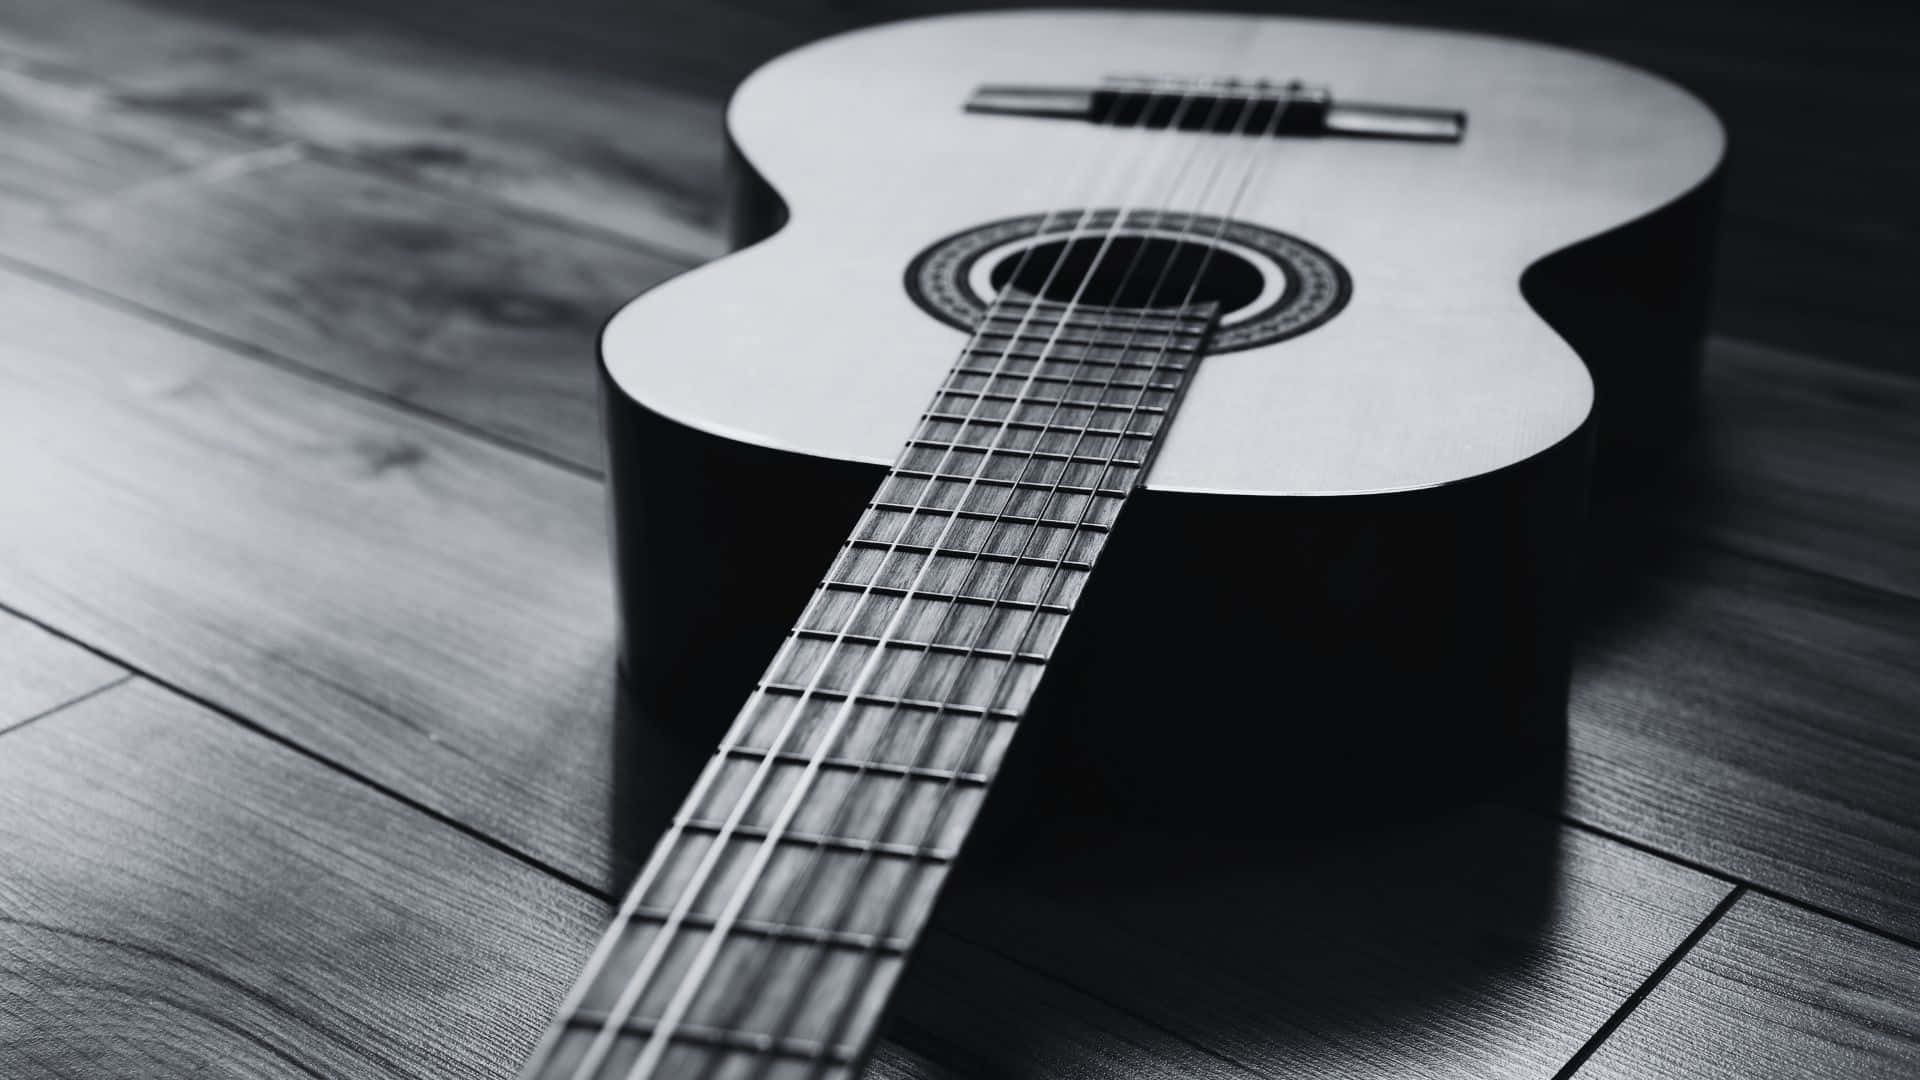 Stunning Black and White Guitar in Close-up View Wallpaper